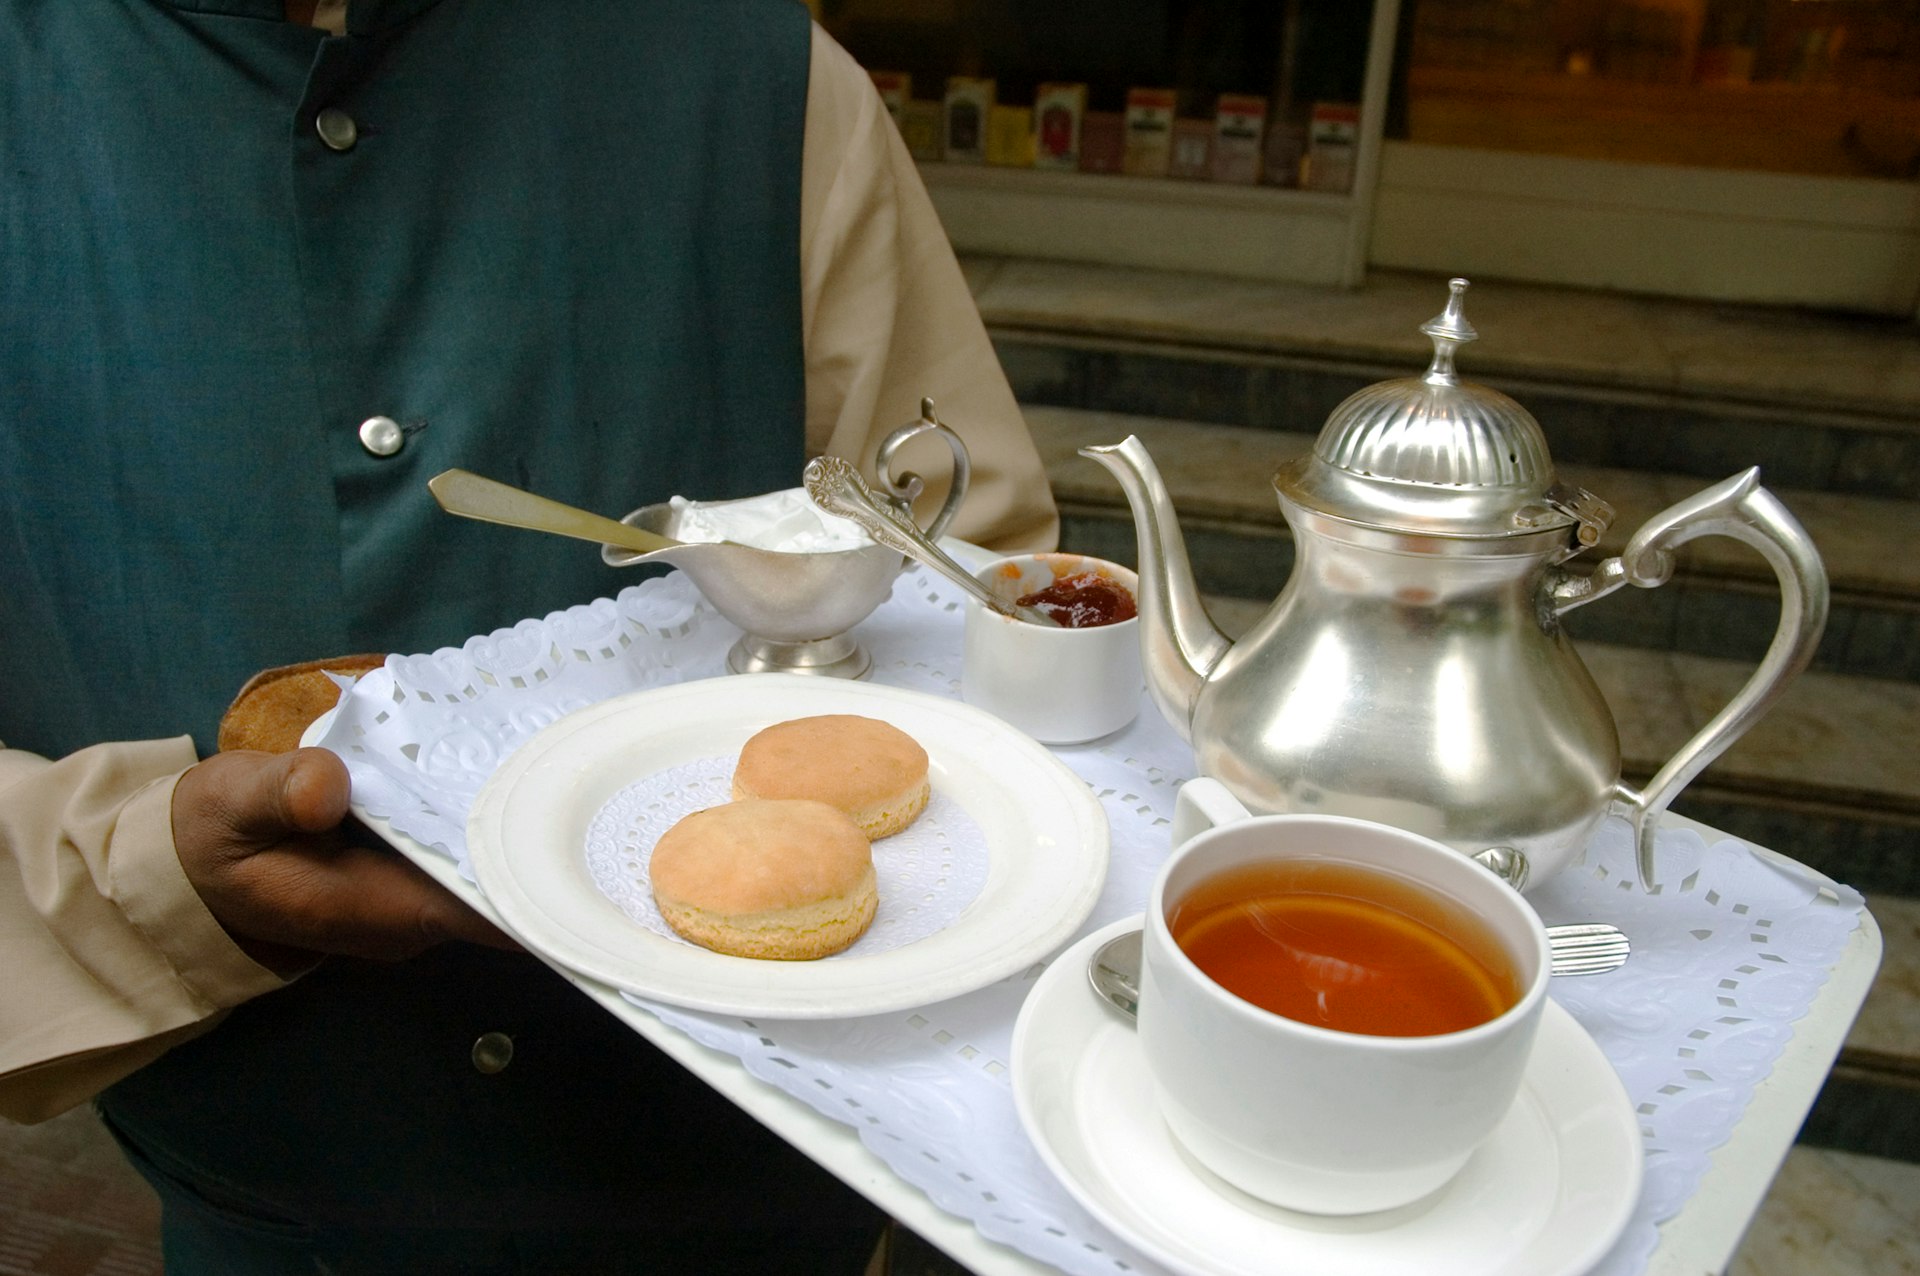 Posh tea, served with style at Tea Centre, Mumbai. Image by Lonely Planet / Getty Images